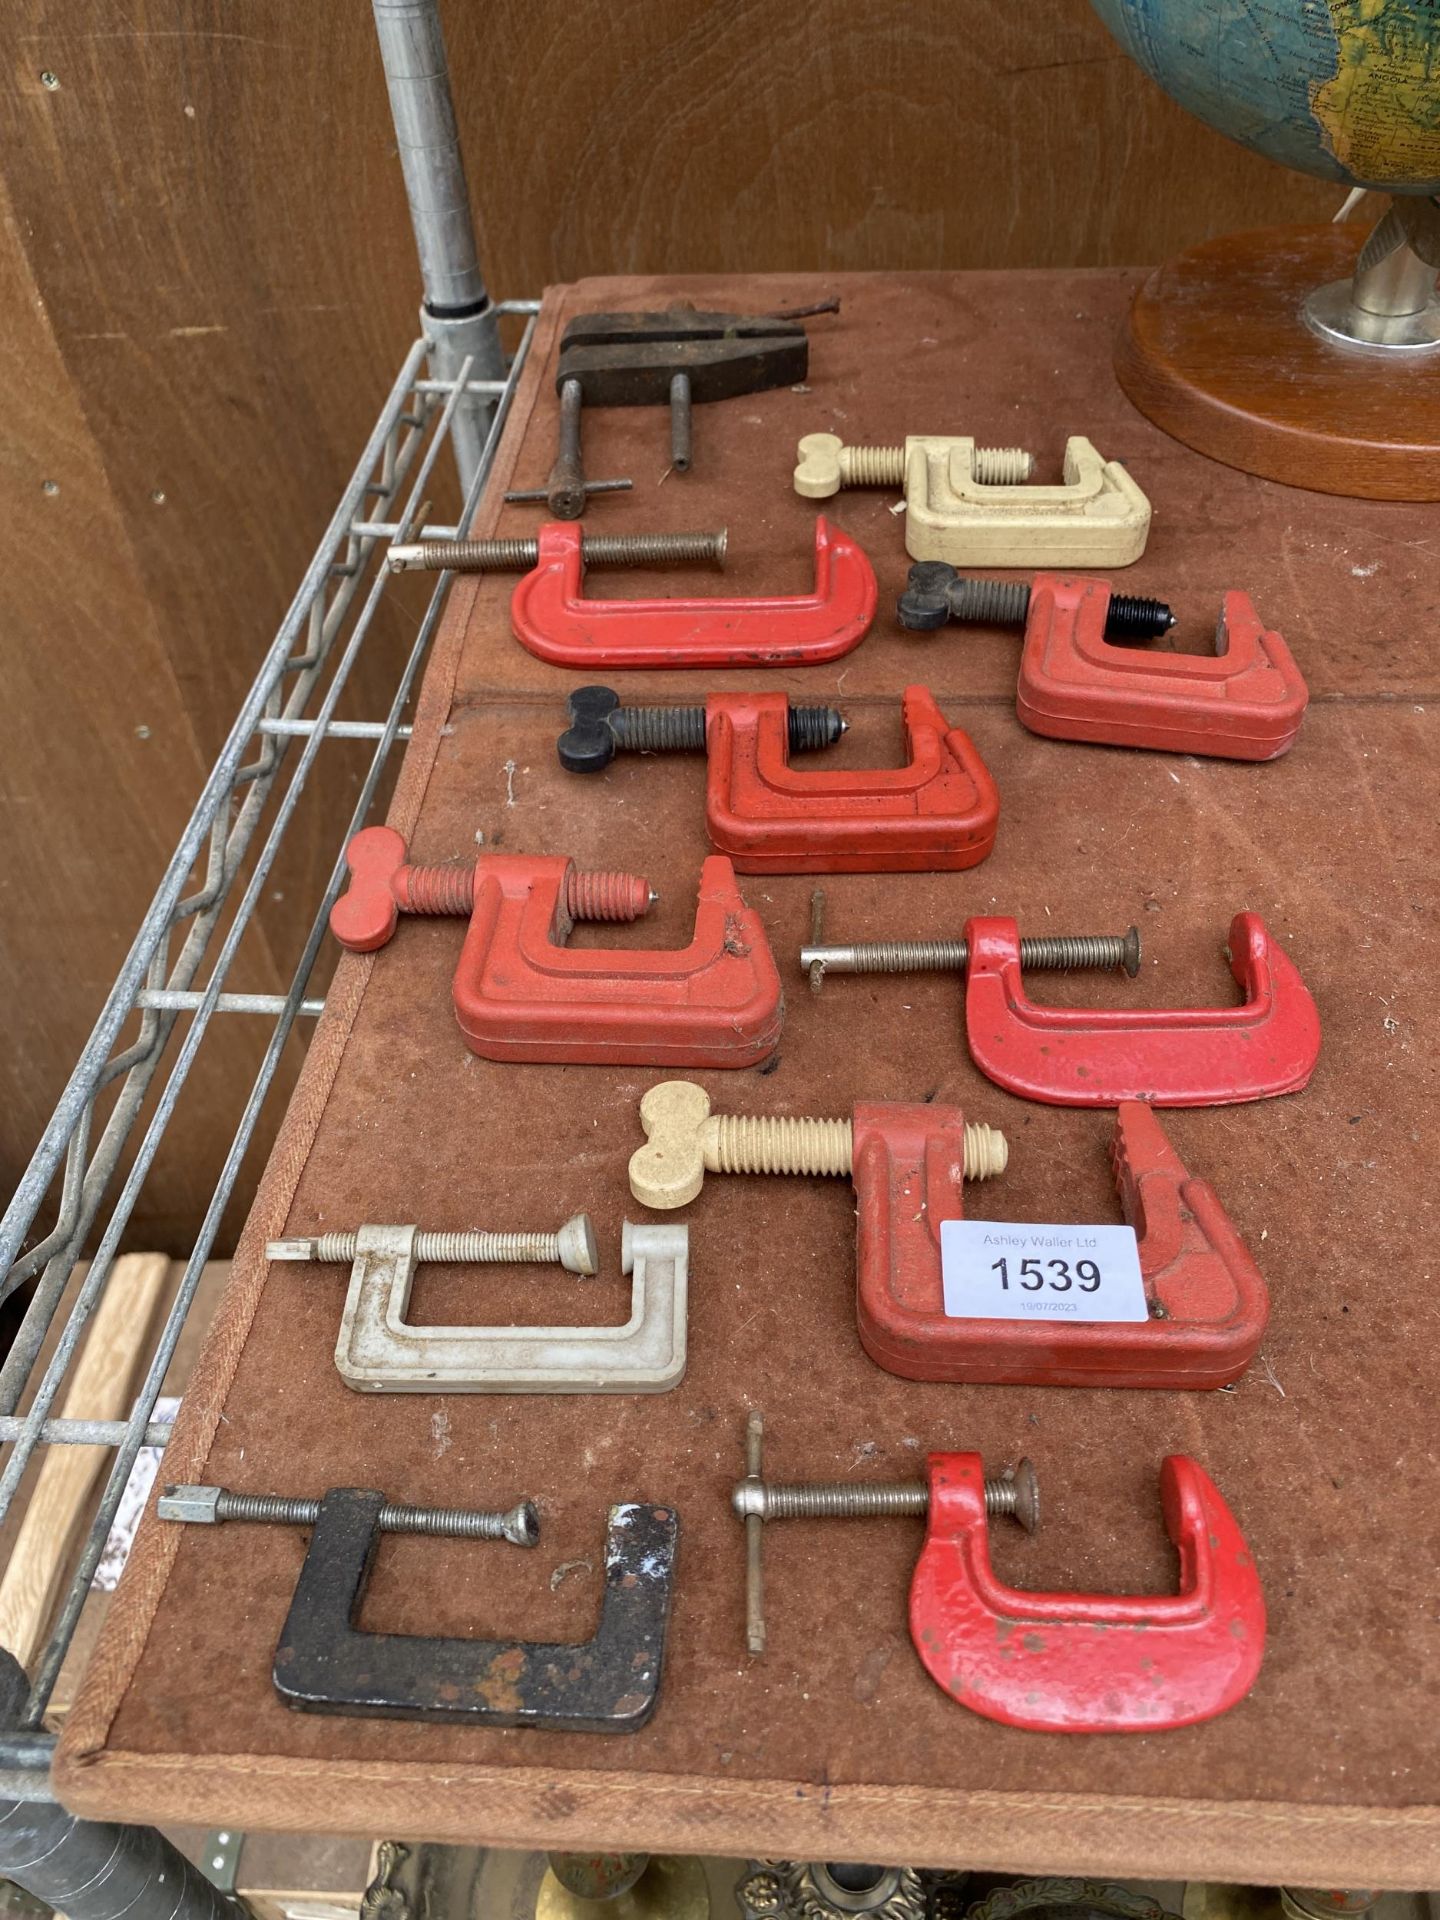 A LARGE ASSORTMENT OF VINTAGE MINIATURE G CLAMPS